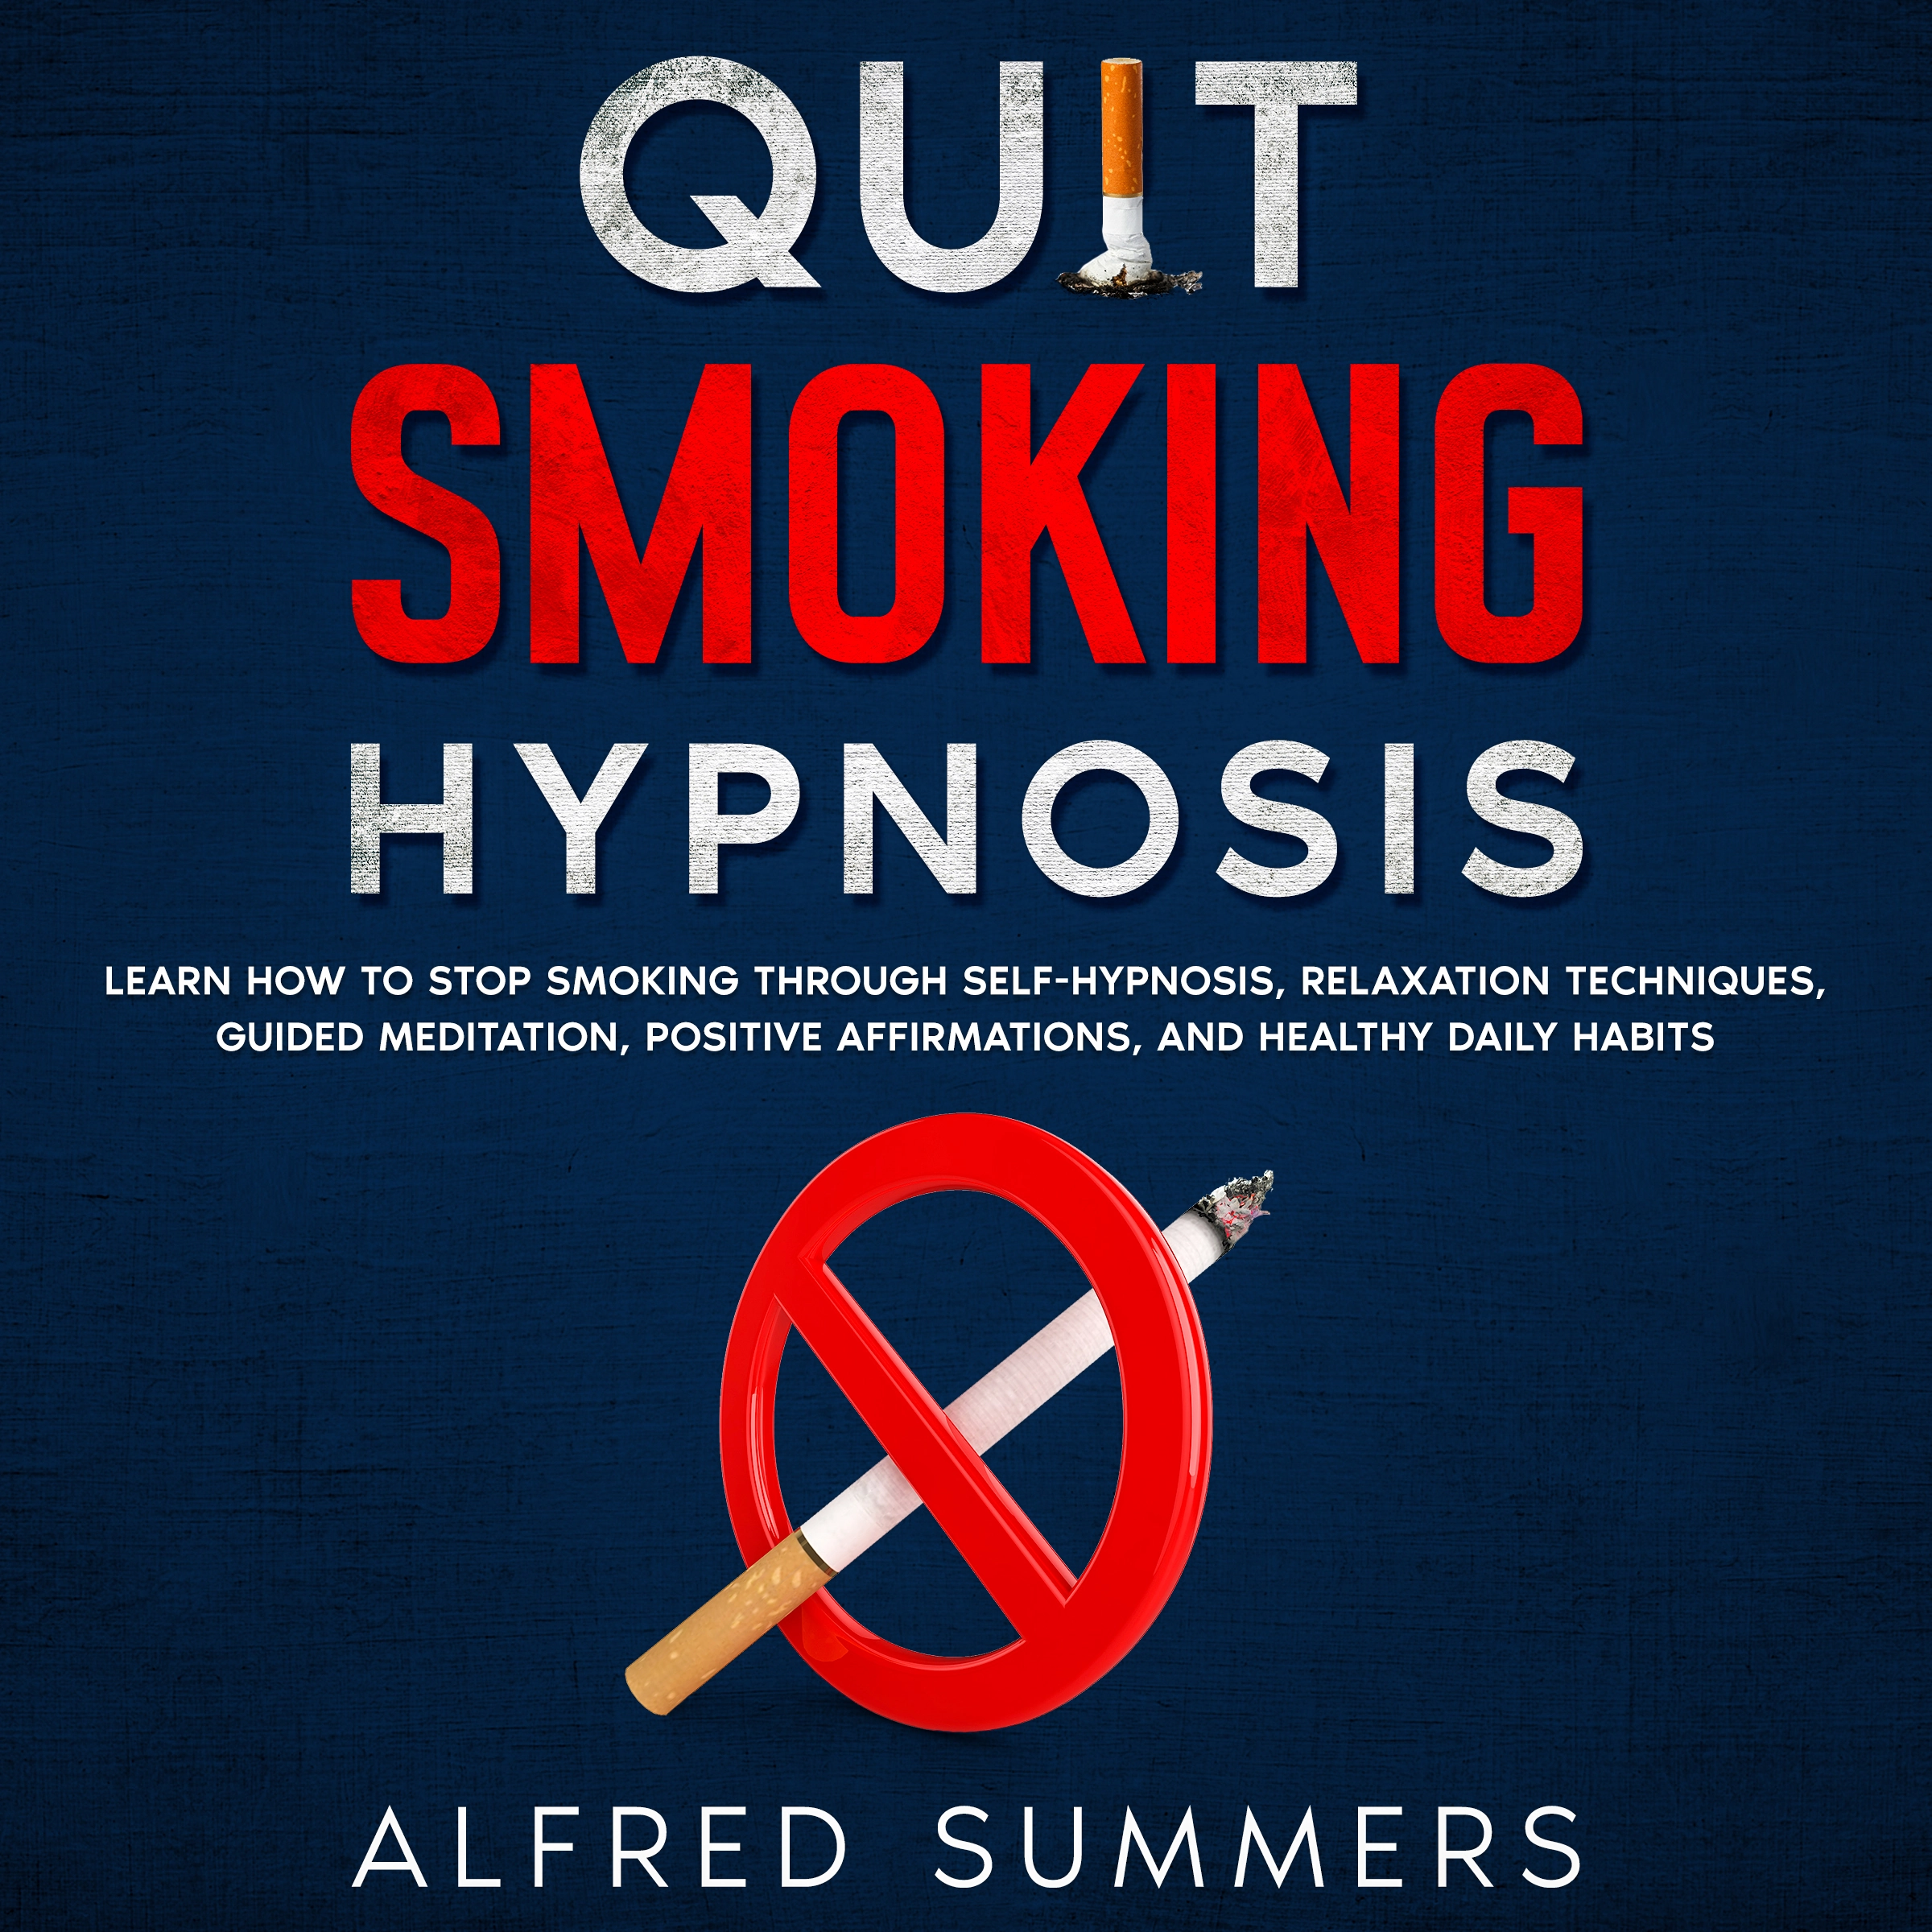 Quit Smoking Hypnosis Audiobook by Alfred Summers